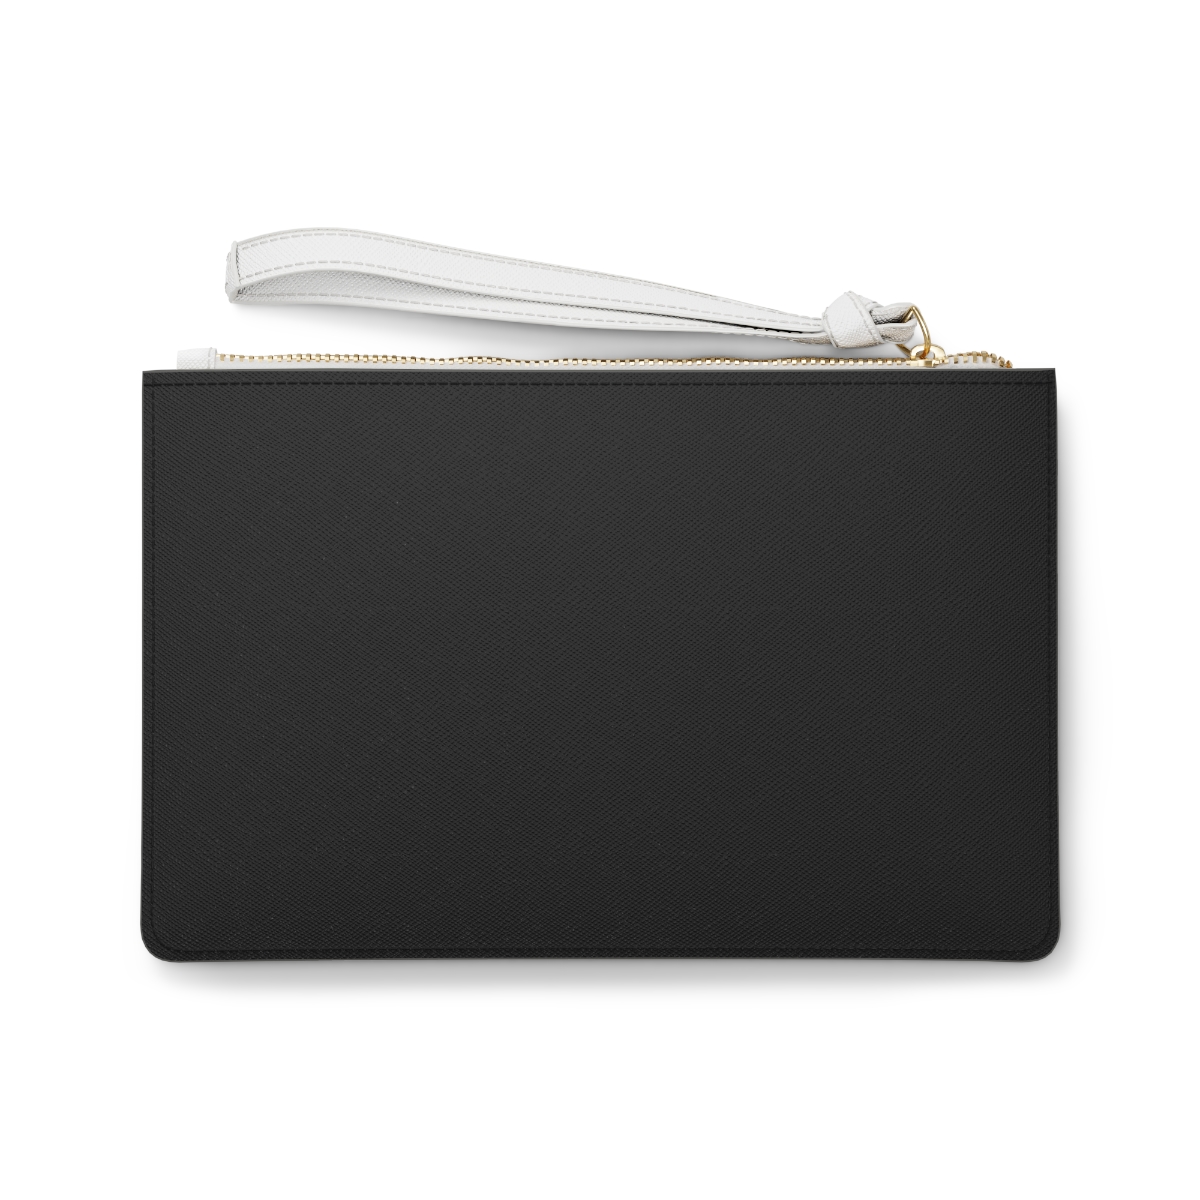 Clutch Bag product thumbnail image